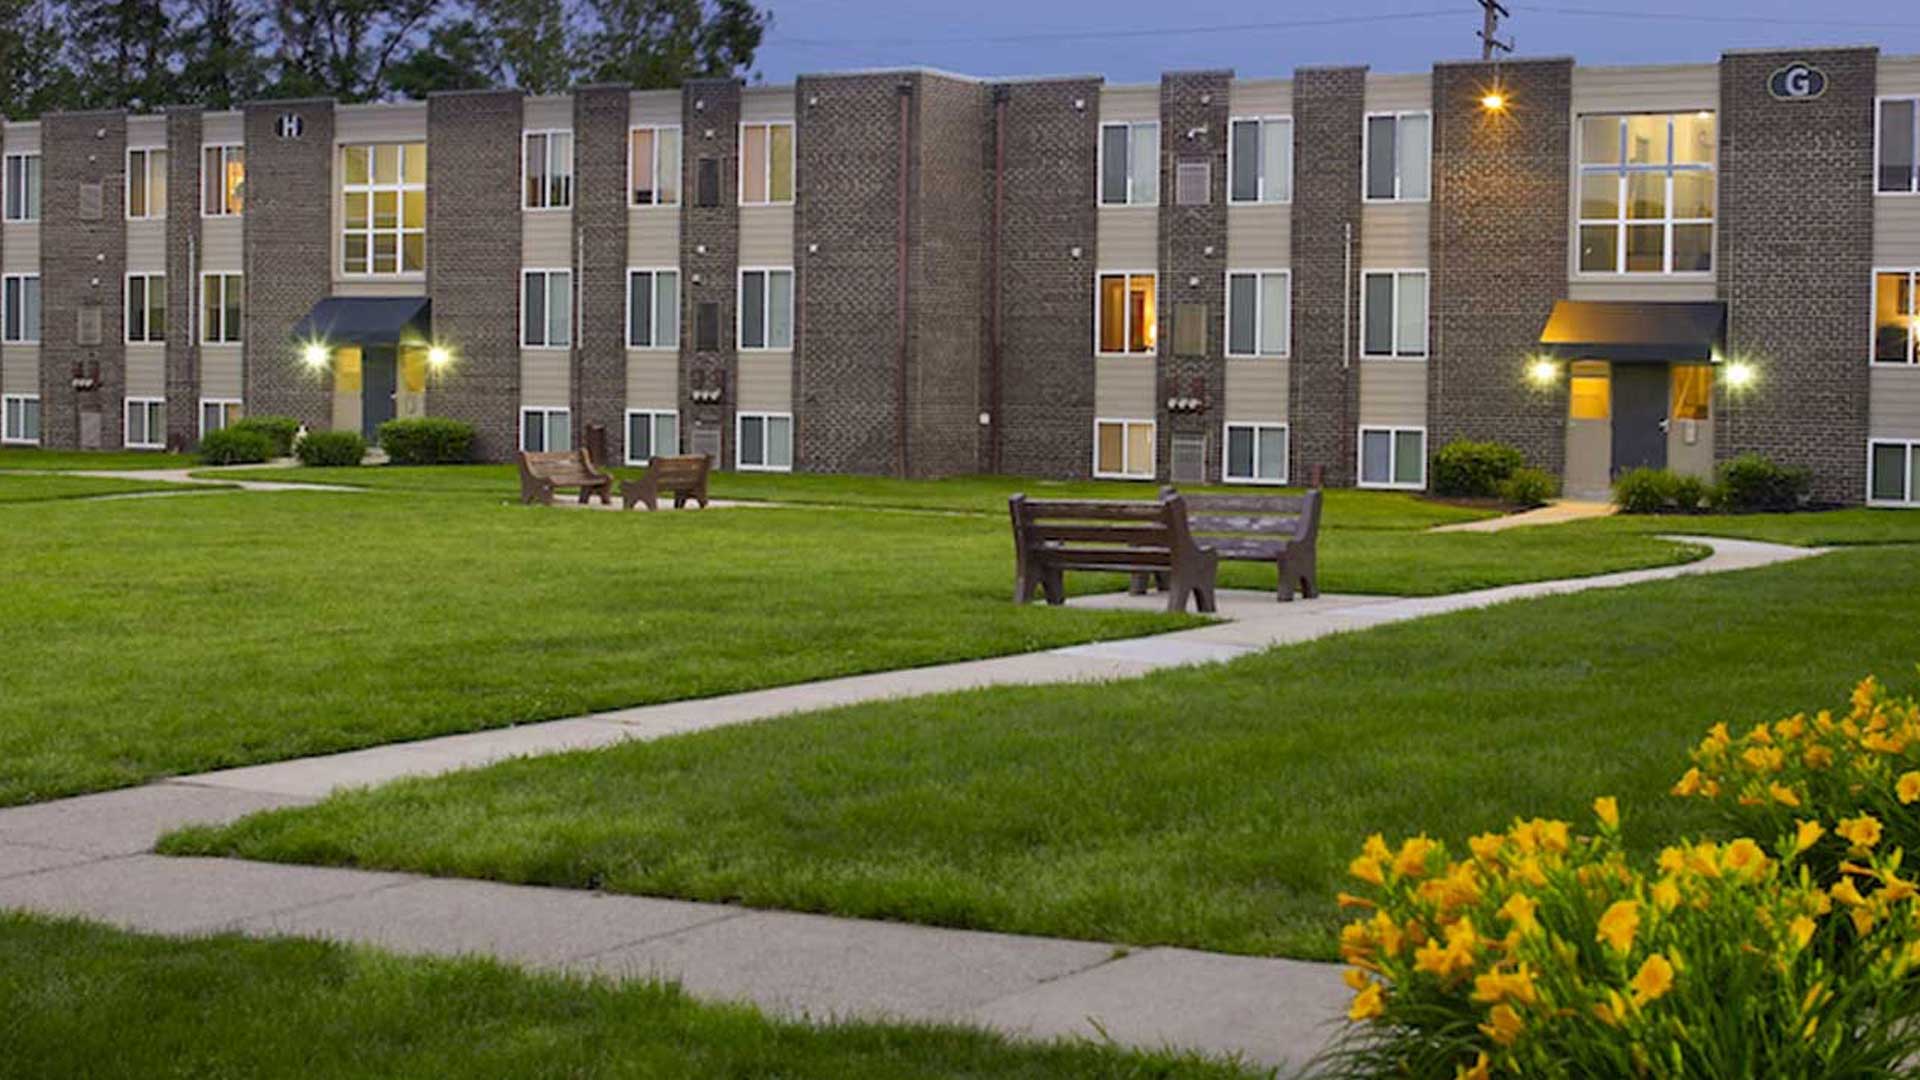 Lion's Gate Apartments building exterior with benches